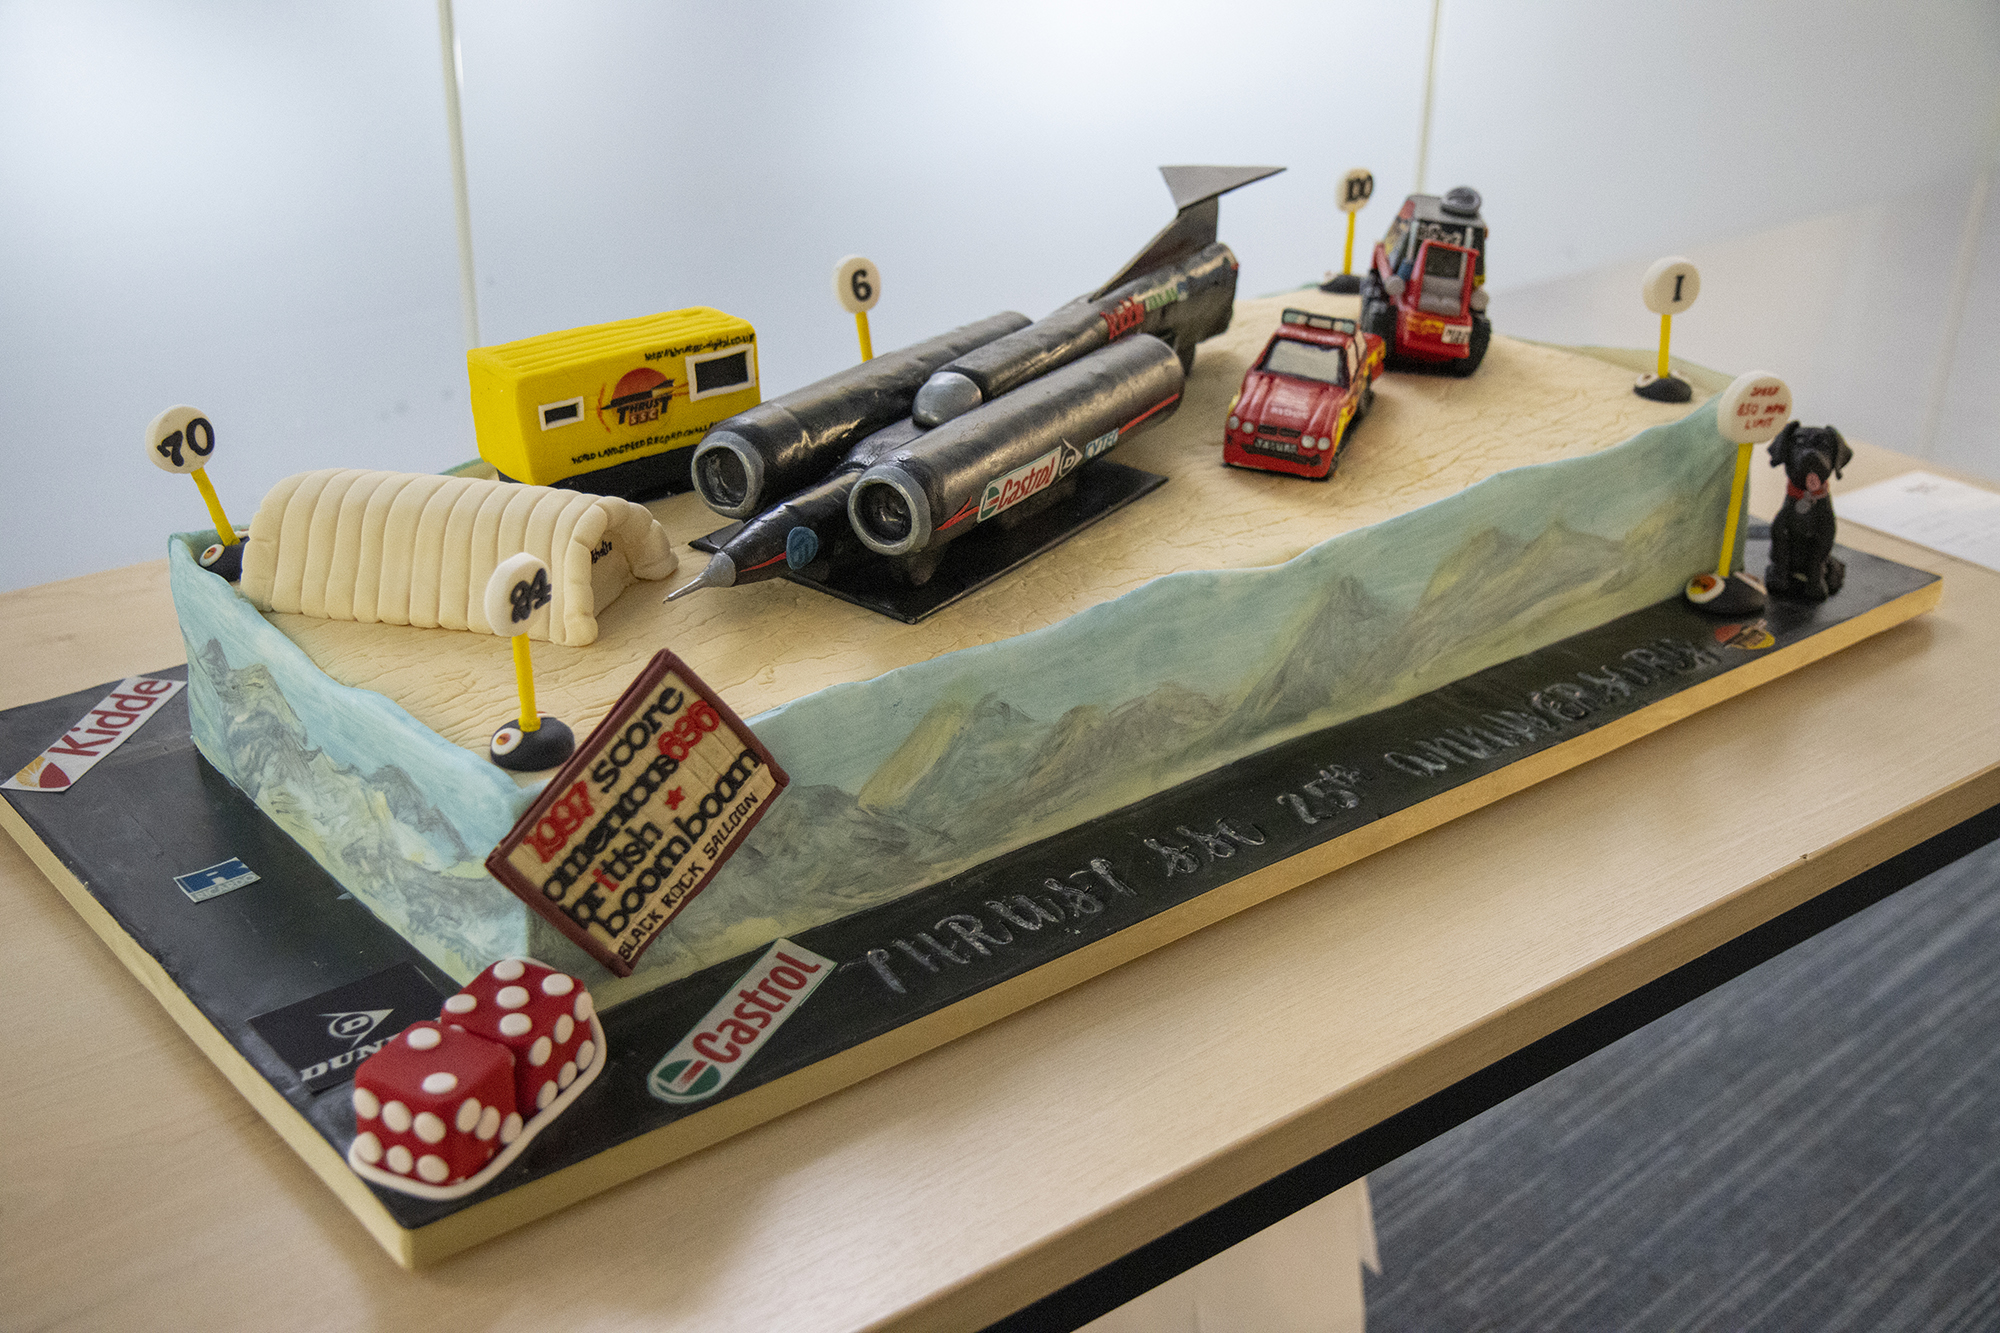 A huge cake with an icing model of Thrust SSC on the top. There are mountains painted on the side, as well as various other Thrust-related objects made out of icing, including support vehicles, mile markers, fluffy dice and a pet dog